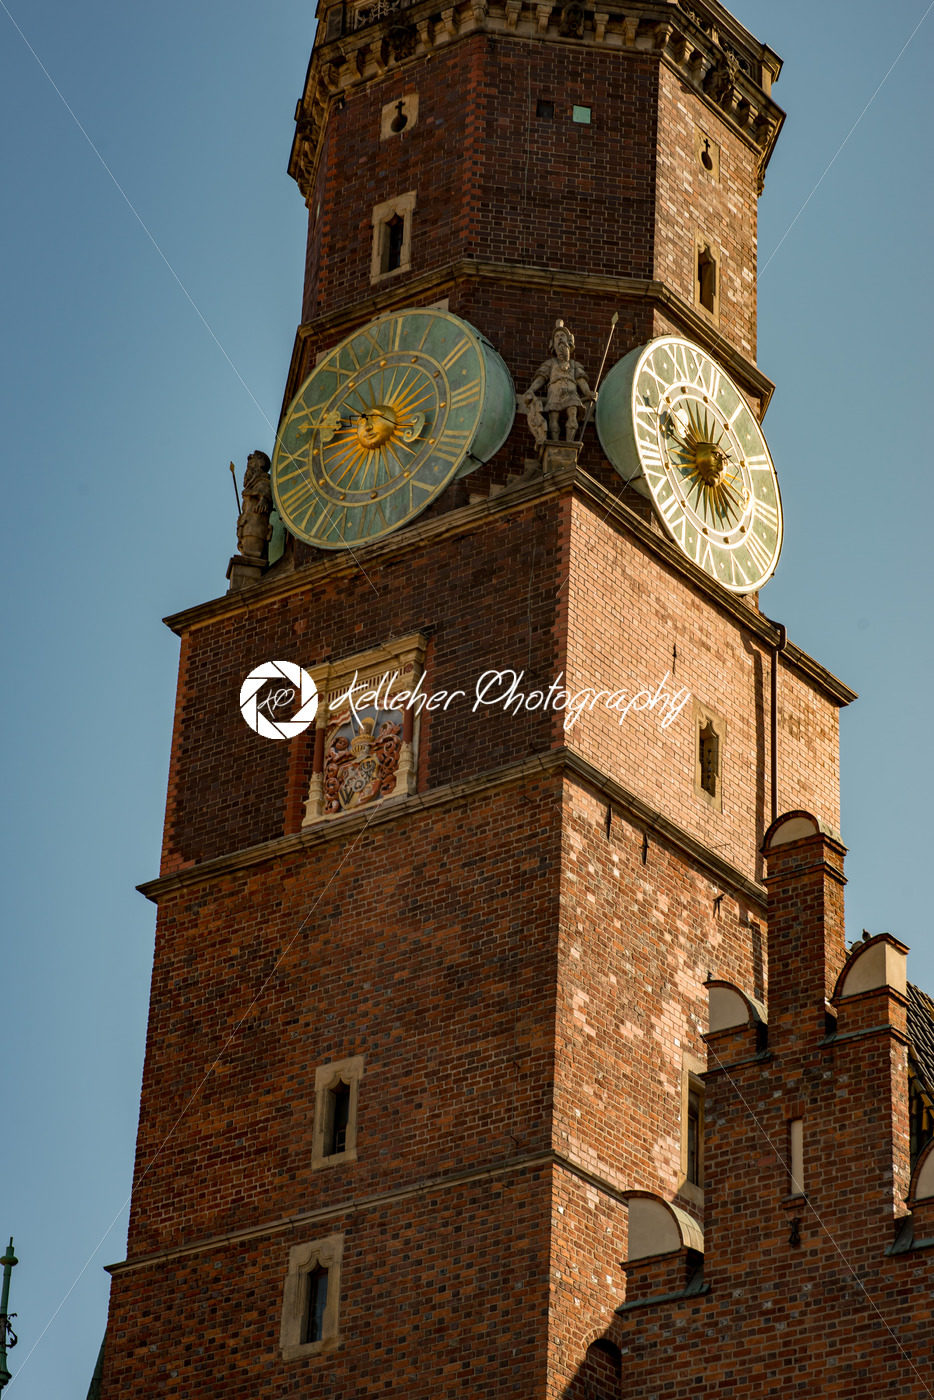 Wroclaw, Poland – March 9, 2018: Wroclaw Town Hall clock tower in morning in historic capital of Silesia, Poland, Europe. - Kelleher Photography Store